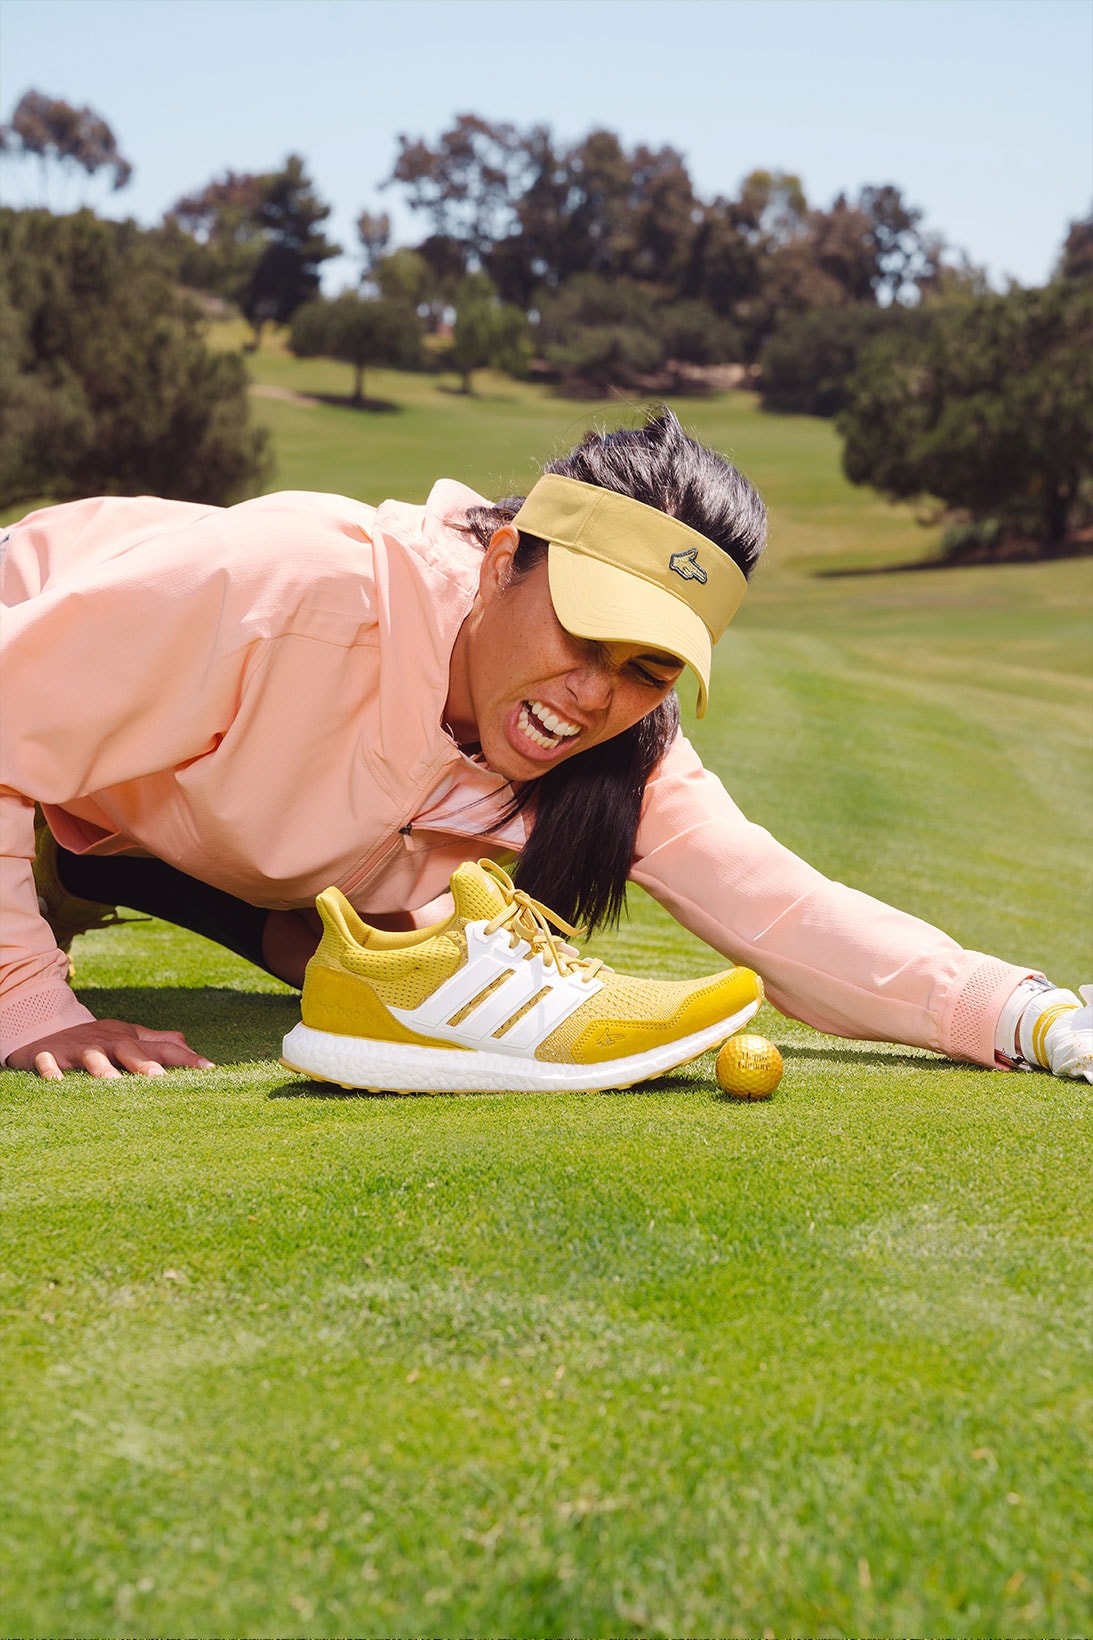 adidas golf extra butter happy gilmore collaboration ultraboost 1.0